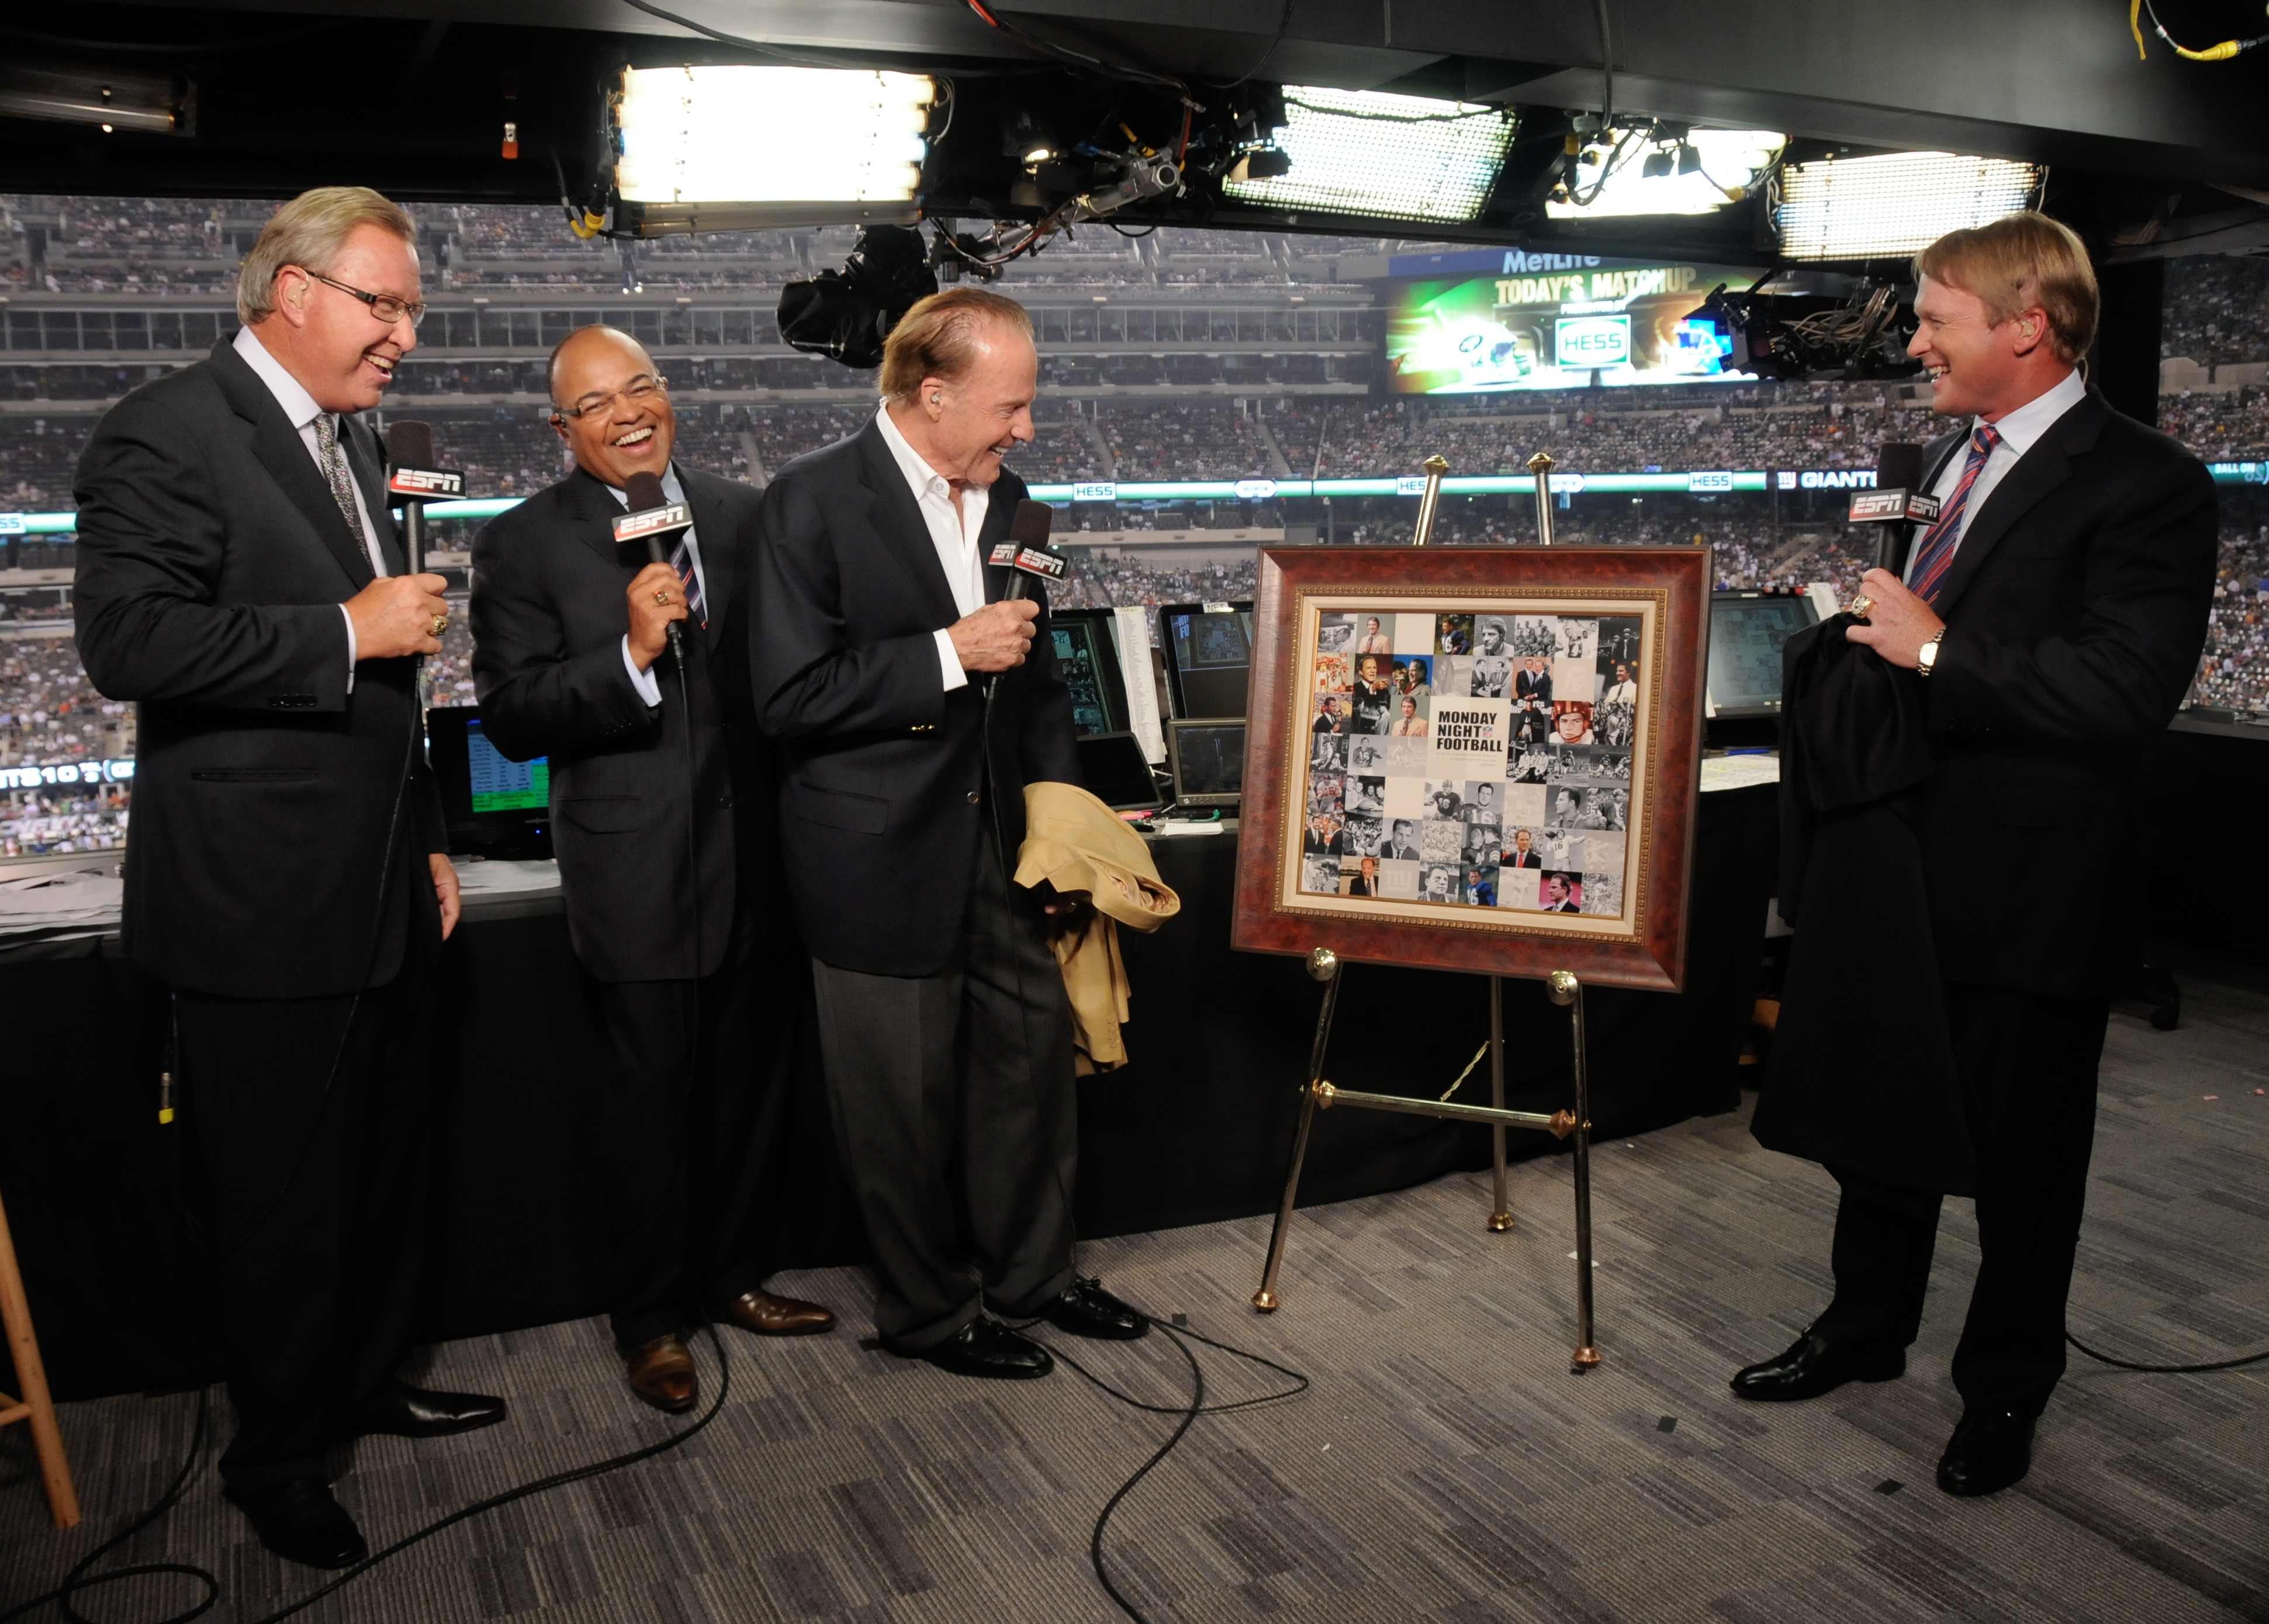 ESPN's Monday Night Football commentators (l to r) Ron Jaworski, Mike Tirico and Jon Gruden present Hall of Famer and former Giants' halfback Frank Gifford with an 80th birthday gift. (Ida Mae Astute/ESPN Images)